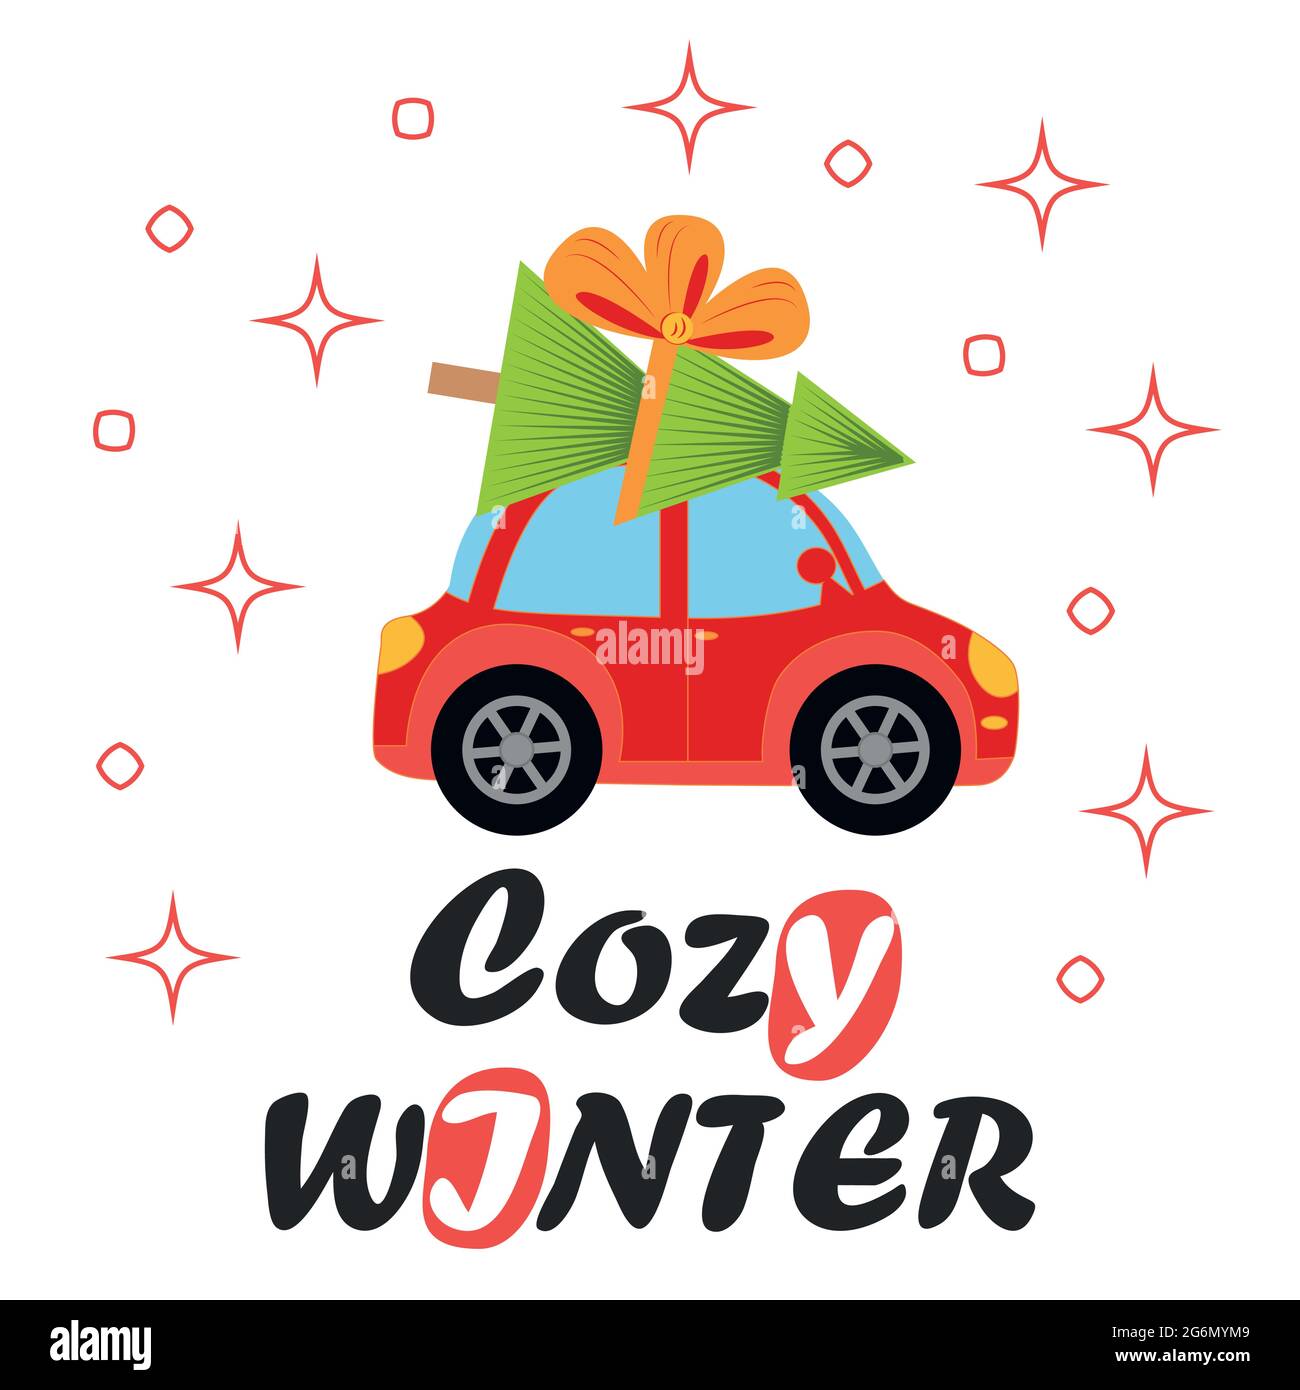 Greeting card with red retro car with christmas tree on the roof. Merry christmas and happy new year illustrations. Stock Vector